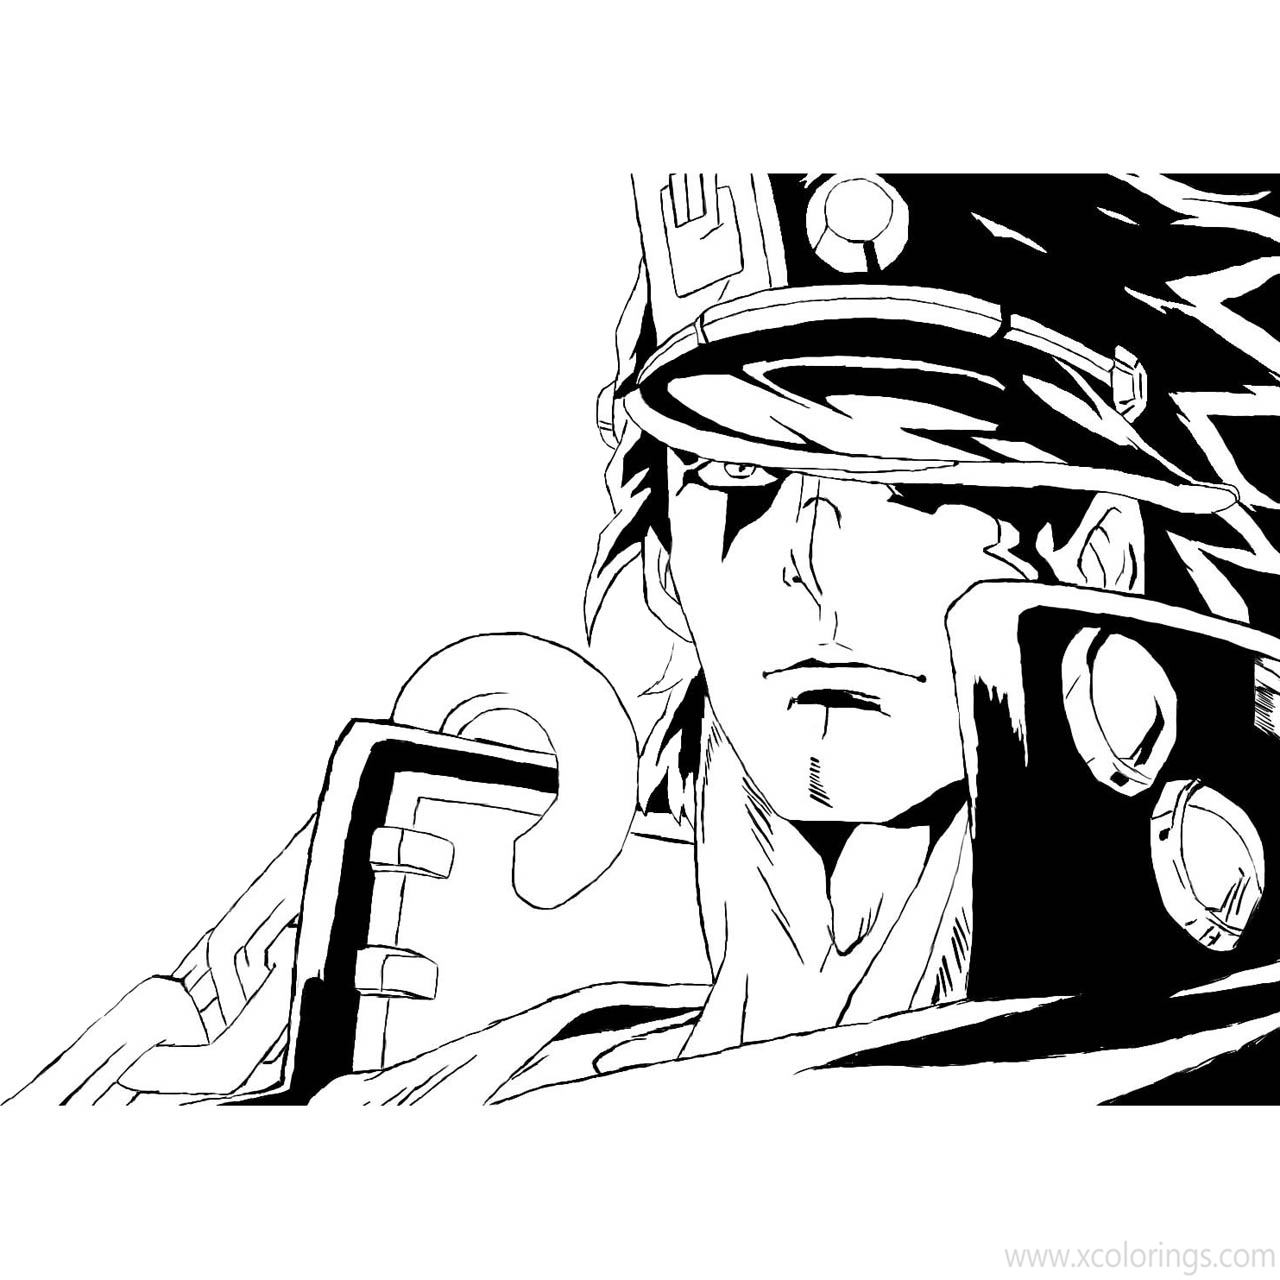 Free JoJo's Bizarre Adventure Coloring Pages Character with Hook printable